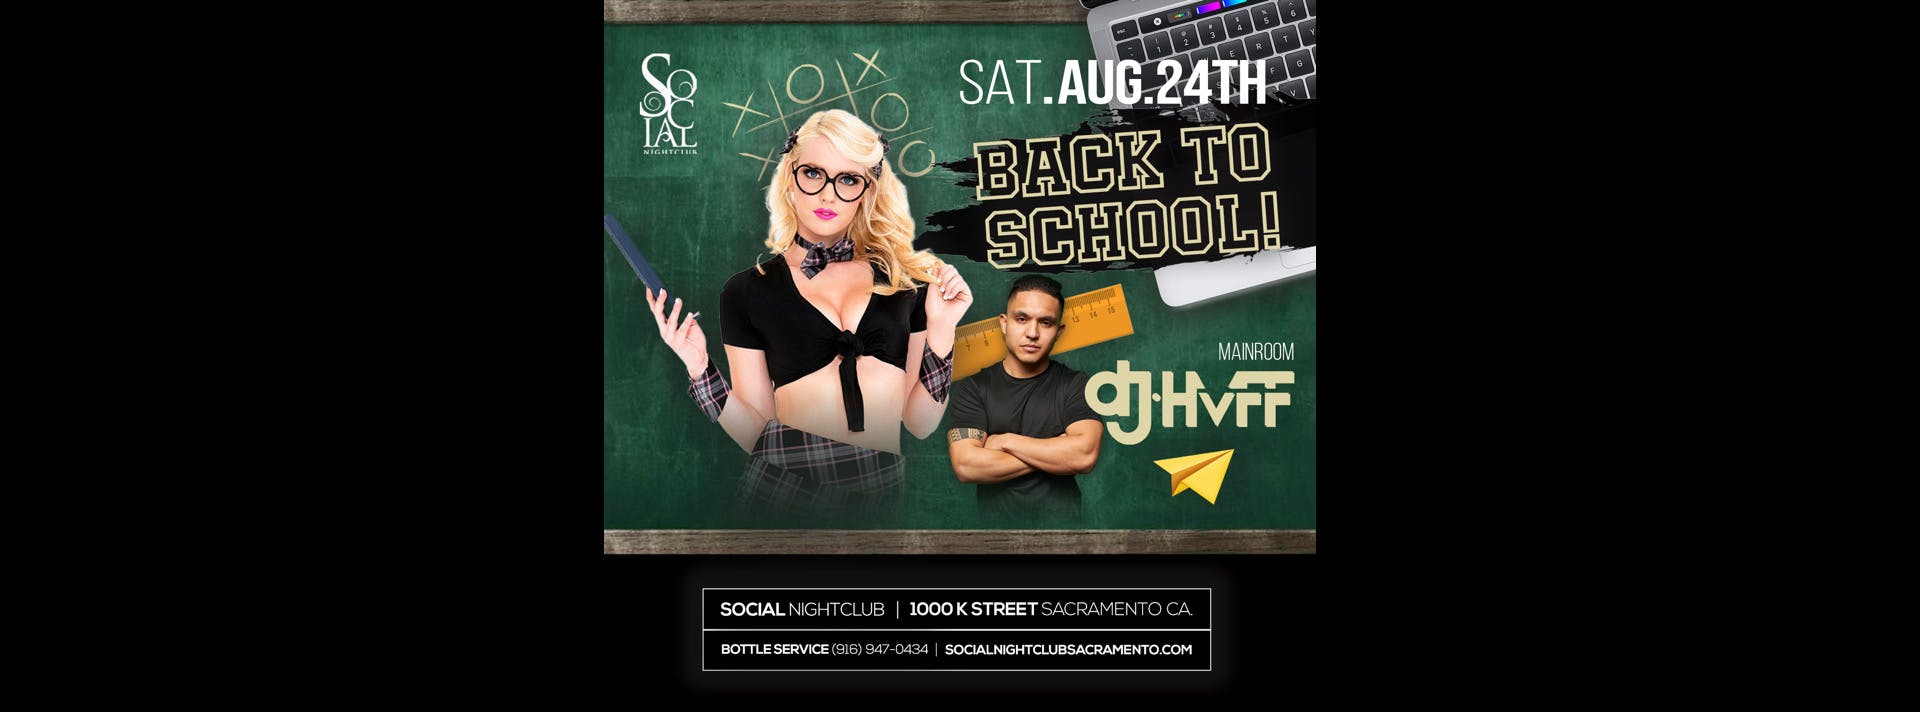 Back to School Party ft. SF/Bay Area renown Artist Dj HVFF